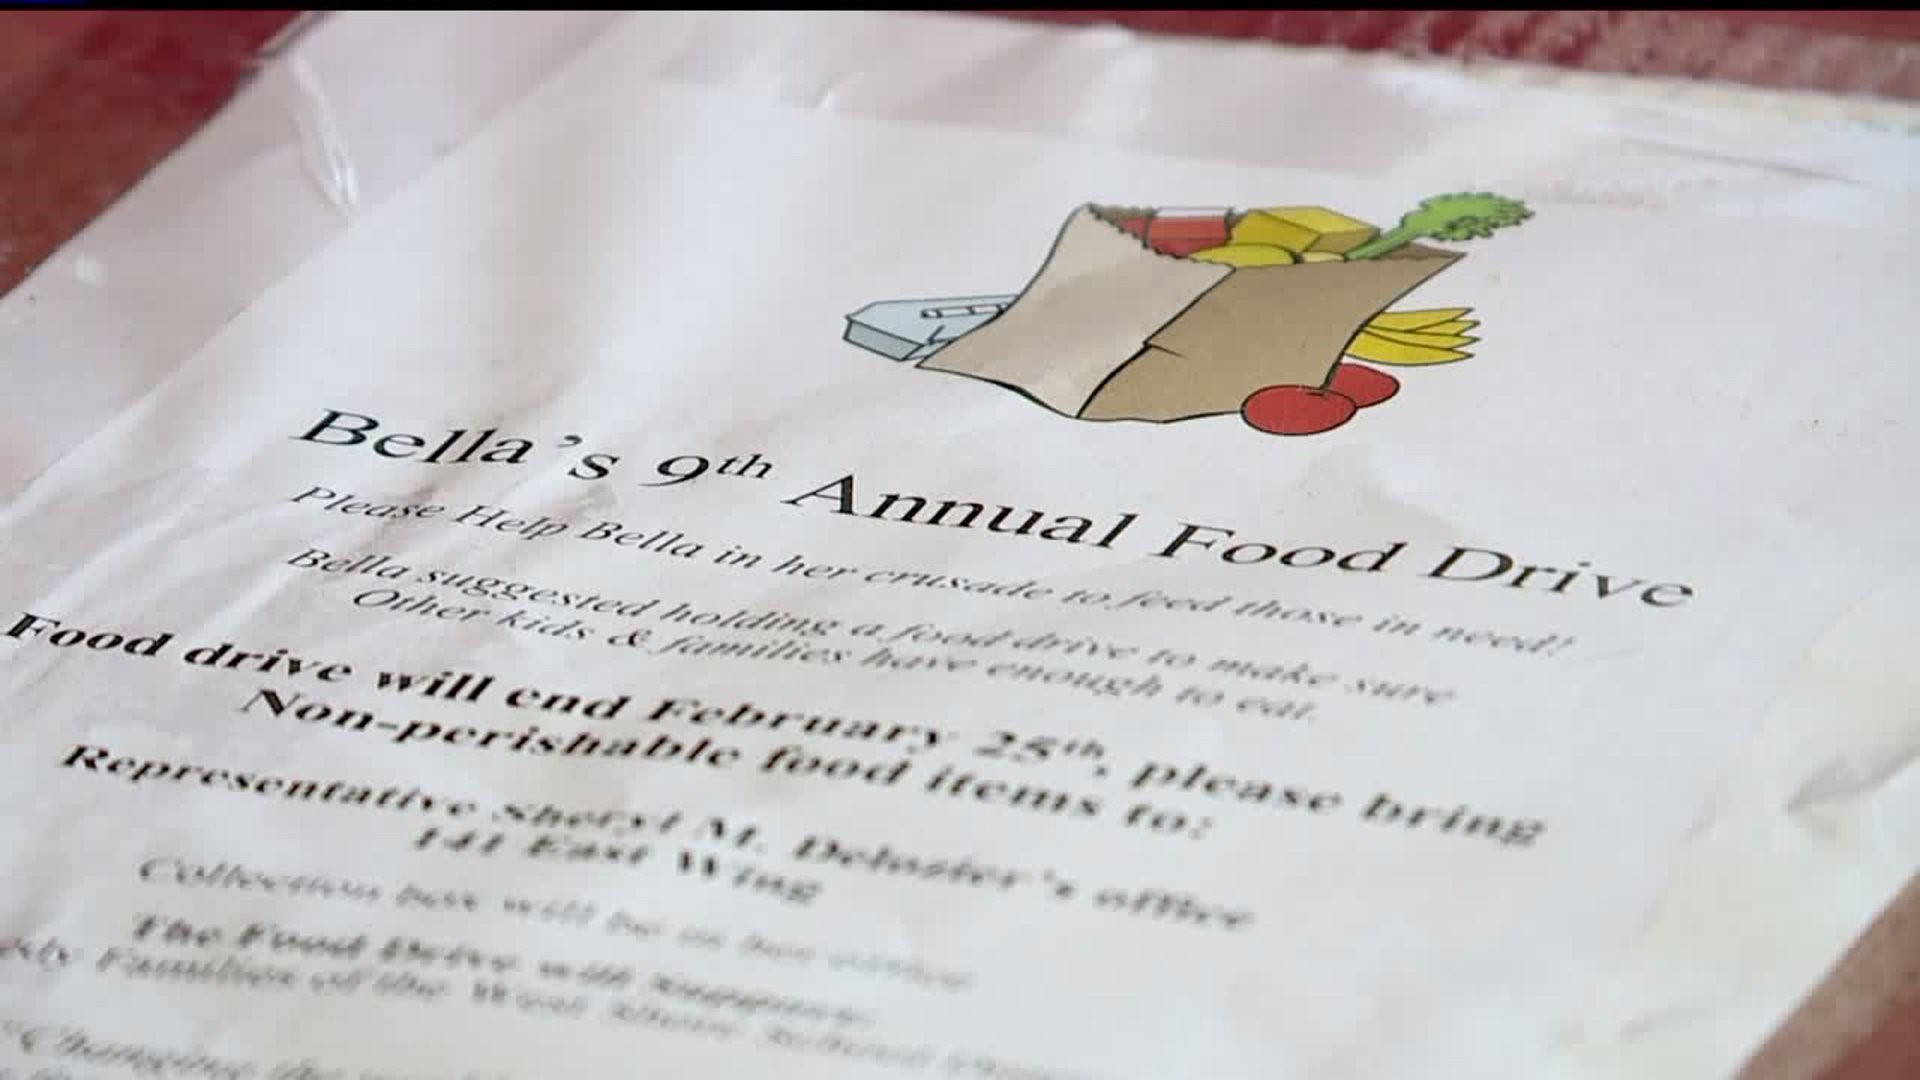 14-year-old hosts 9th annual food drive in Lemoyne, looks for donations